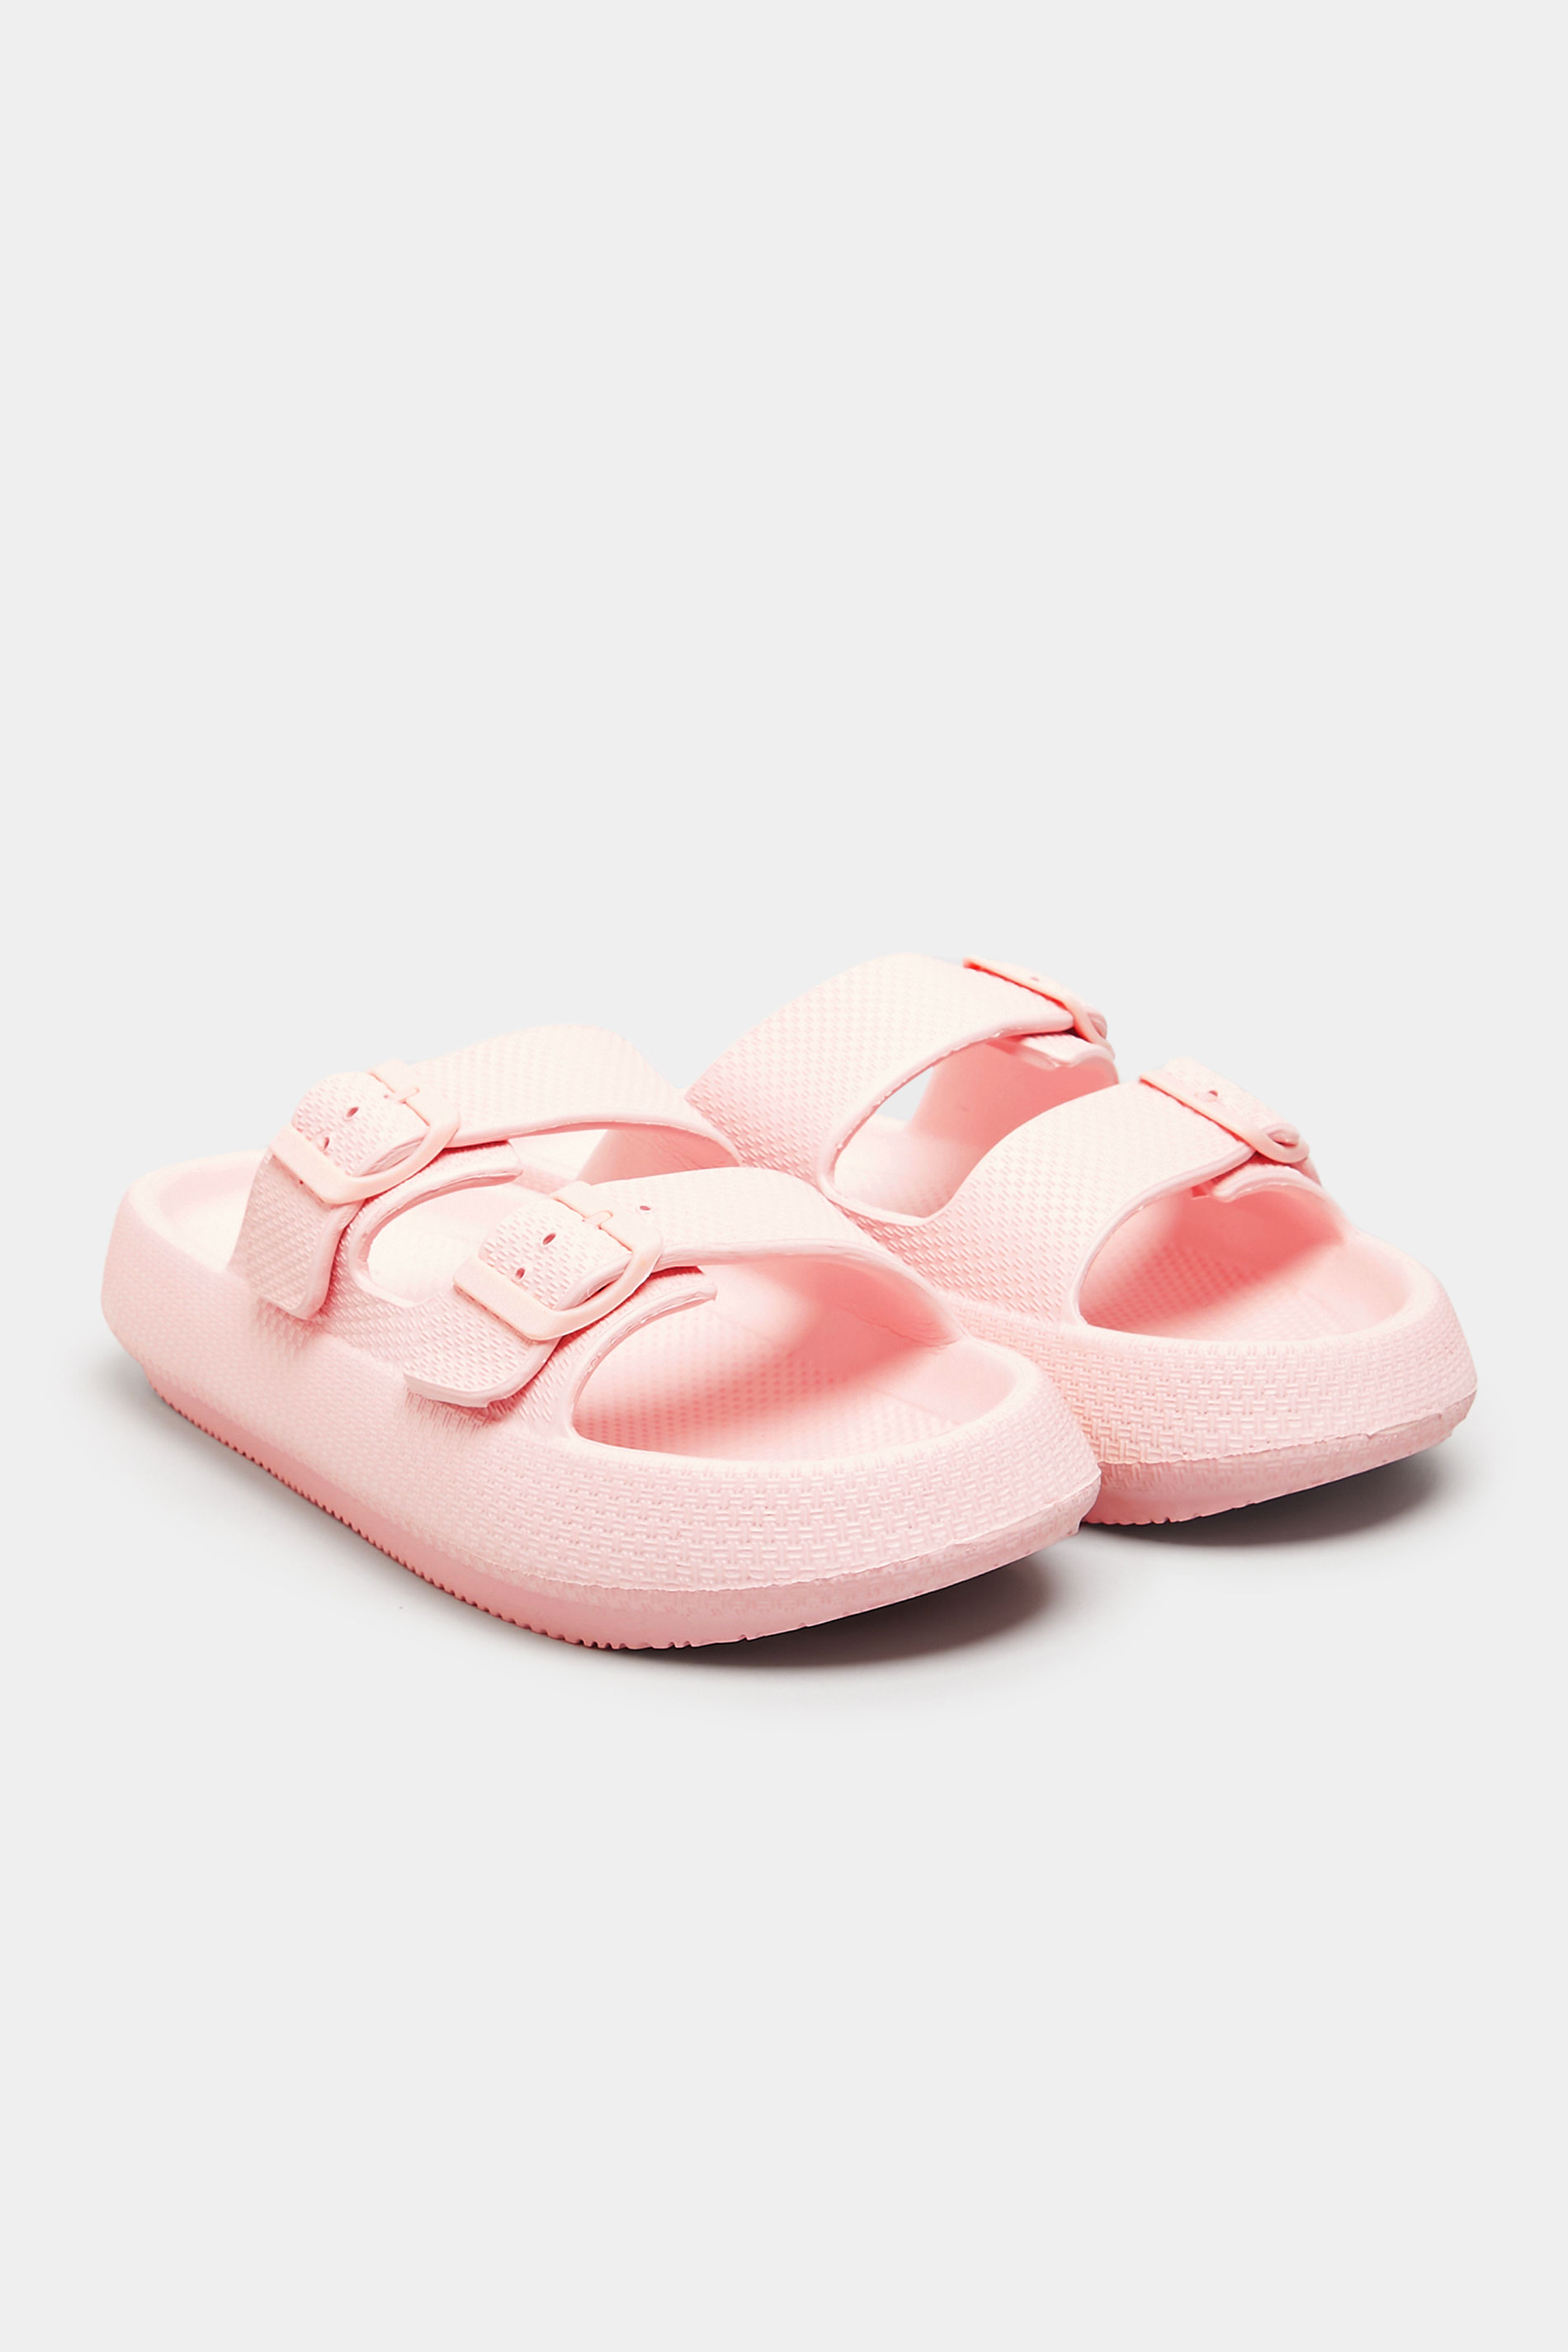 Chaussures Pieds Larges Sandales Pieds Larges | Sandales Roses à Boucles Pieds Larges EEE - ZY78216